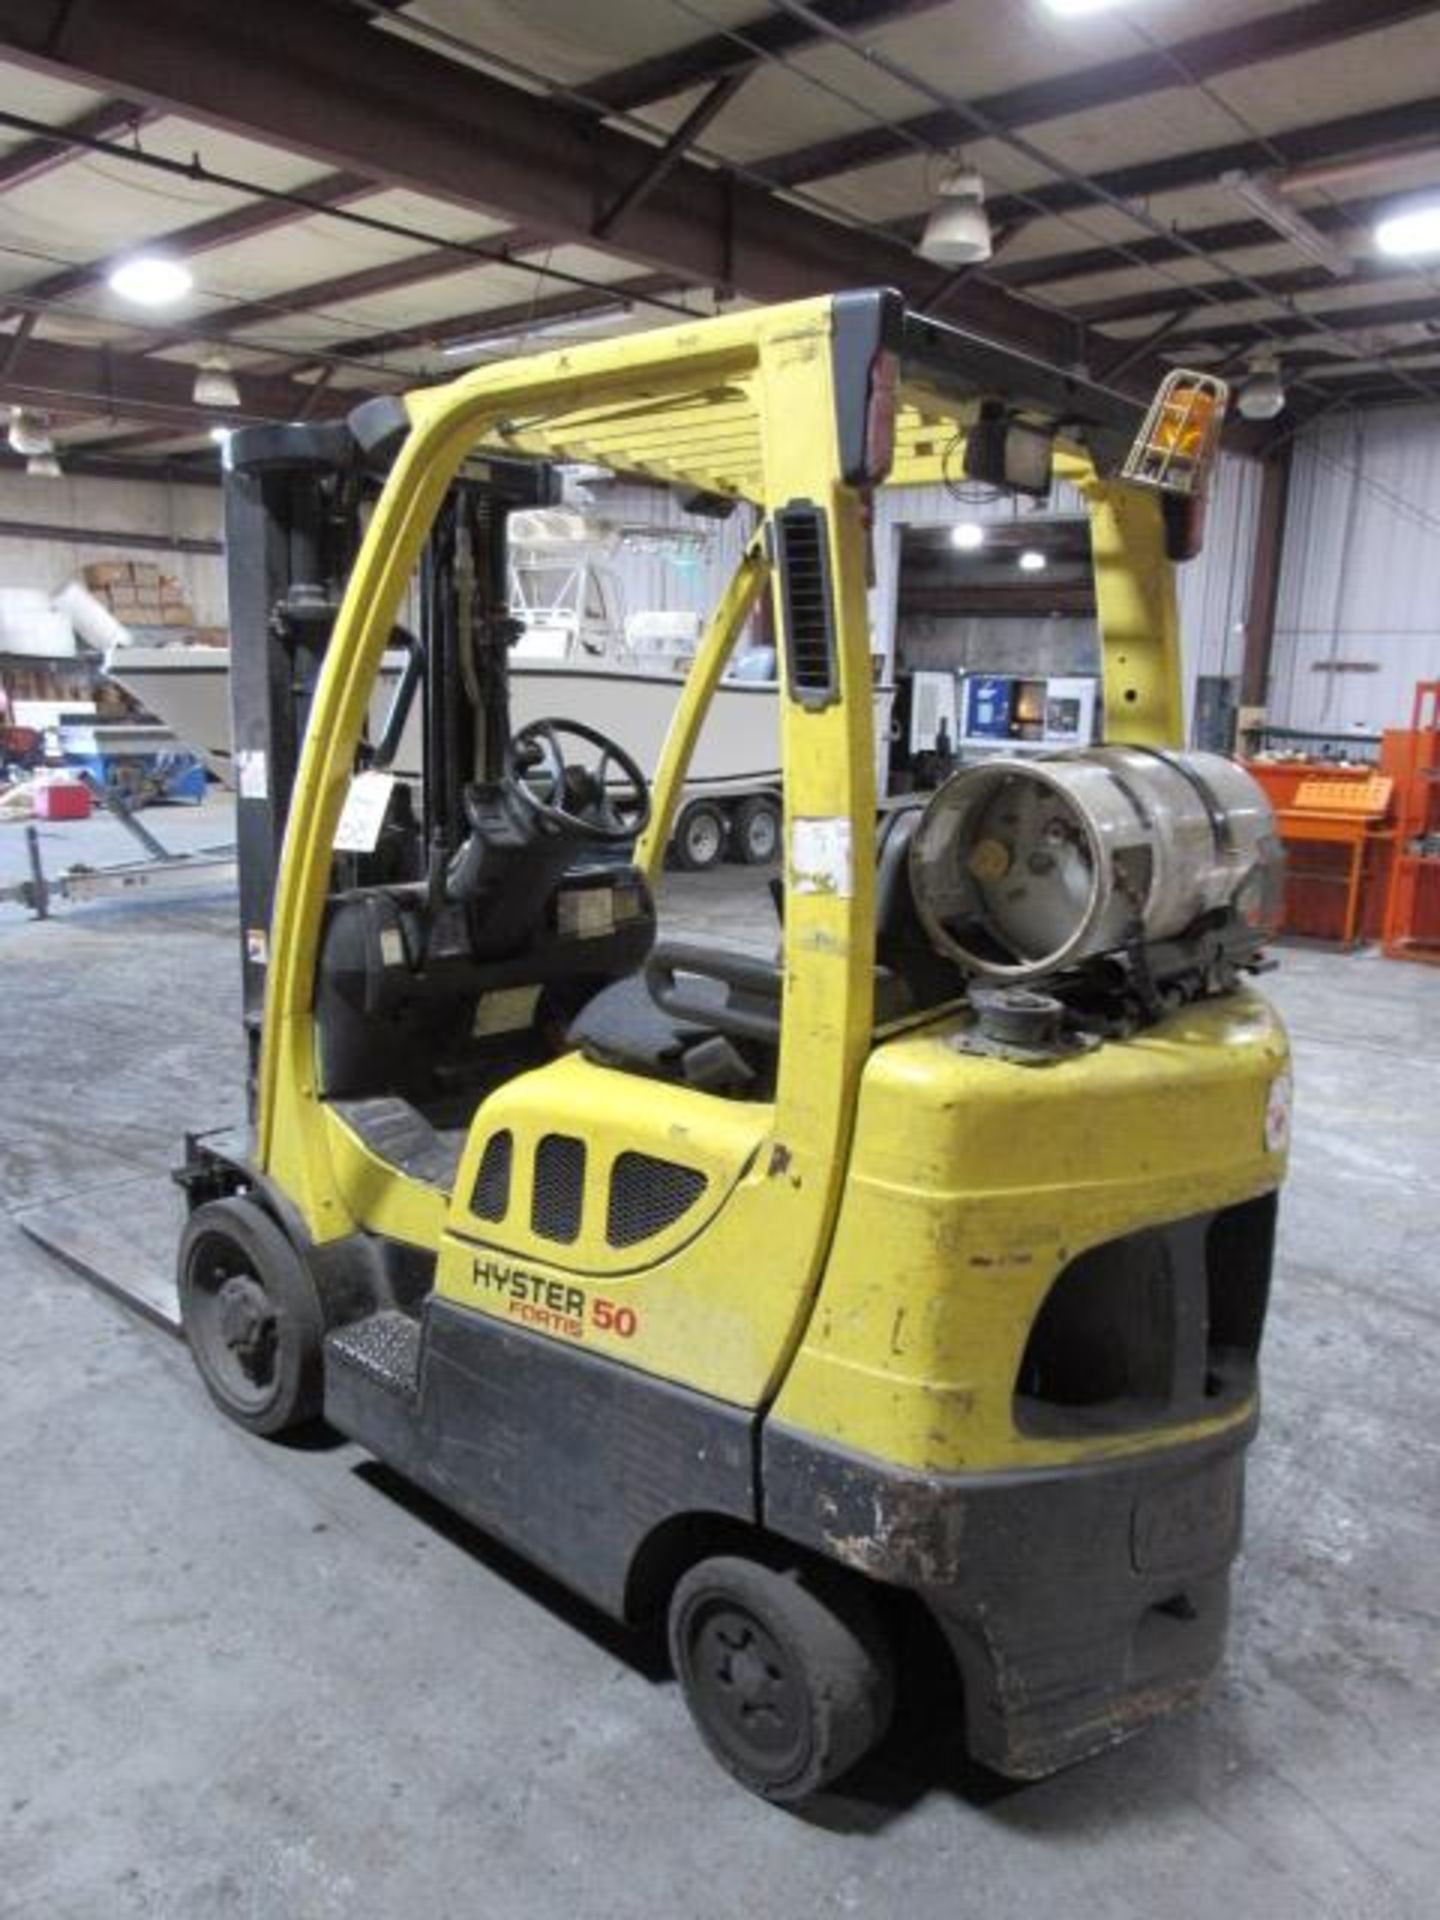 Hyster Model F50 5,000lb Capacity LP Gas Forklift - Image 4 of 8